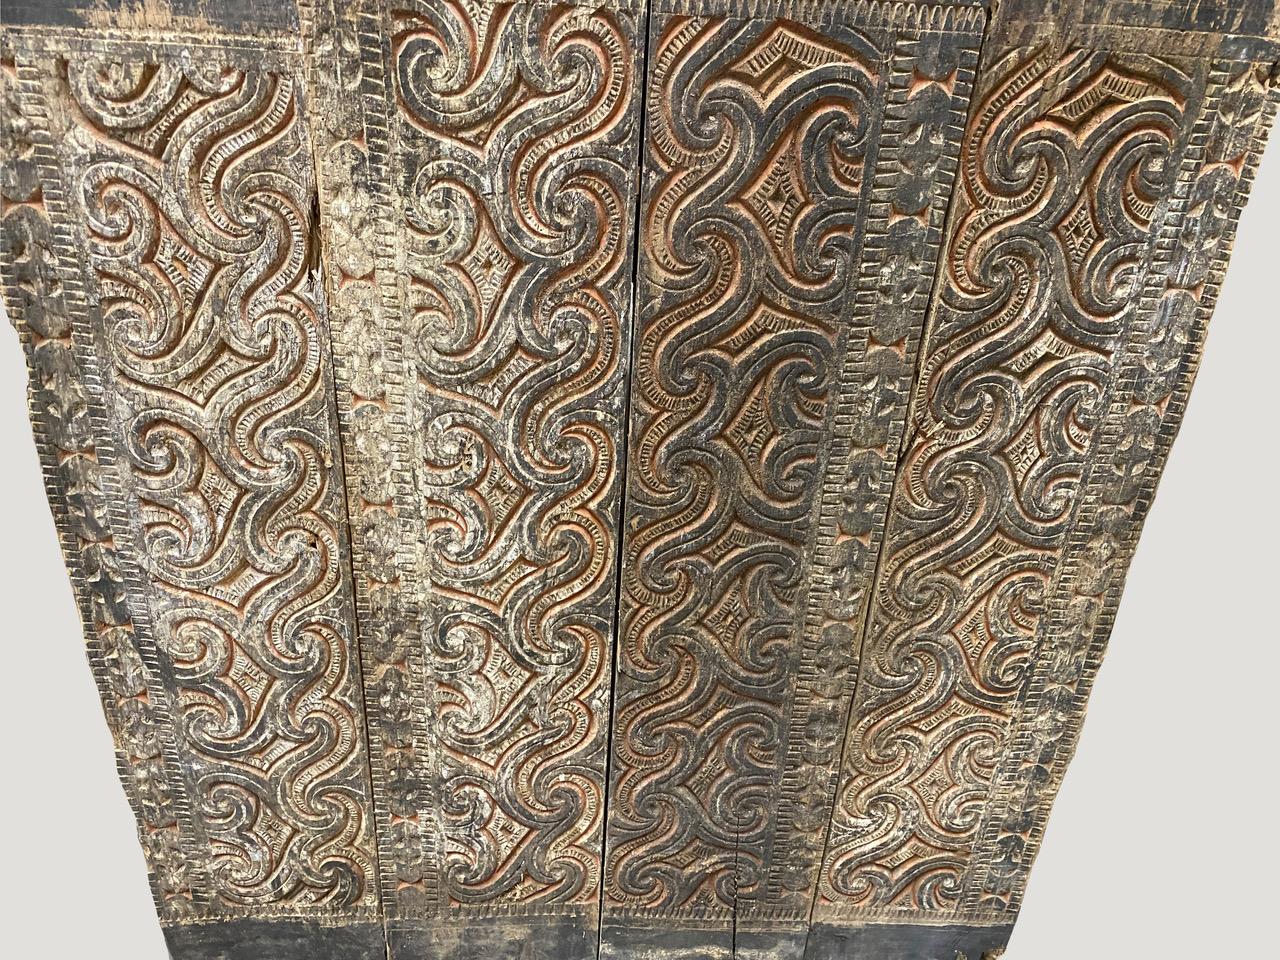 Andrianna Shamaris hand carved architectural panel from Toraja. The carving symbolizes peace and happiness. Originally used as an exterior panel.

Andrianna Shamaris. The Leader In Modern Organic Design.